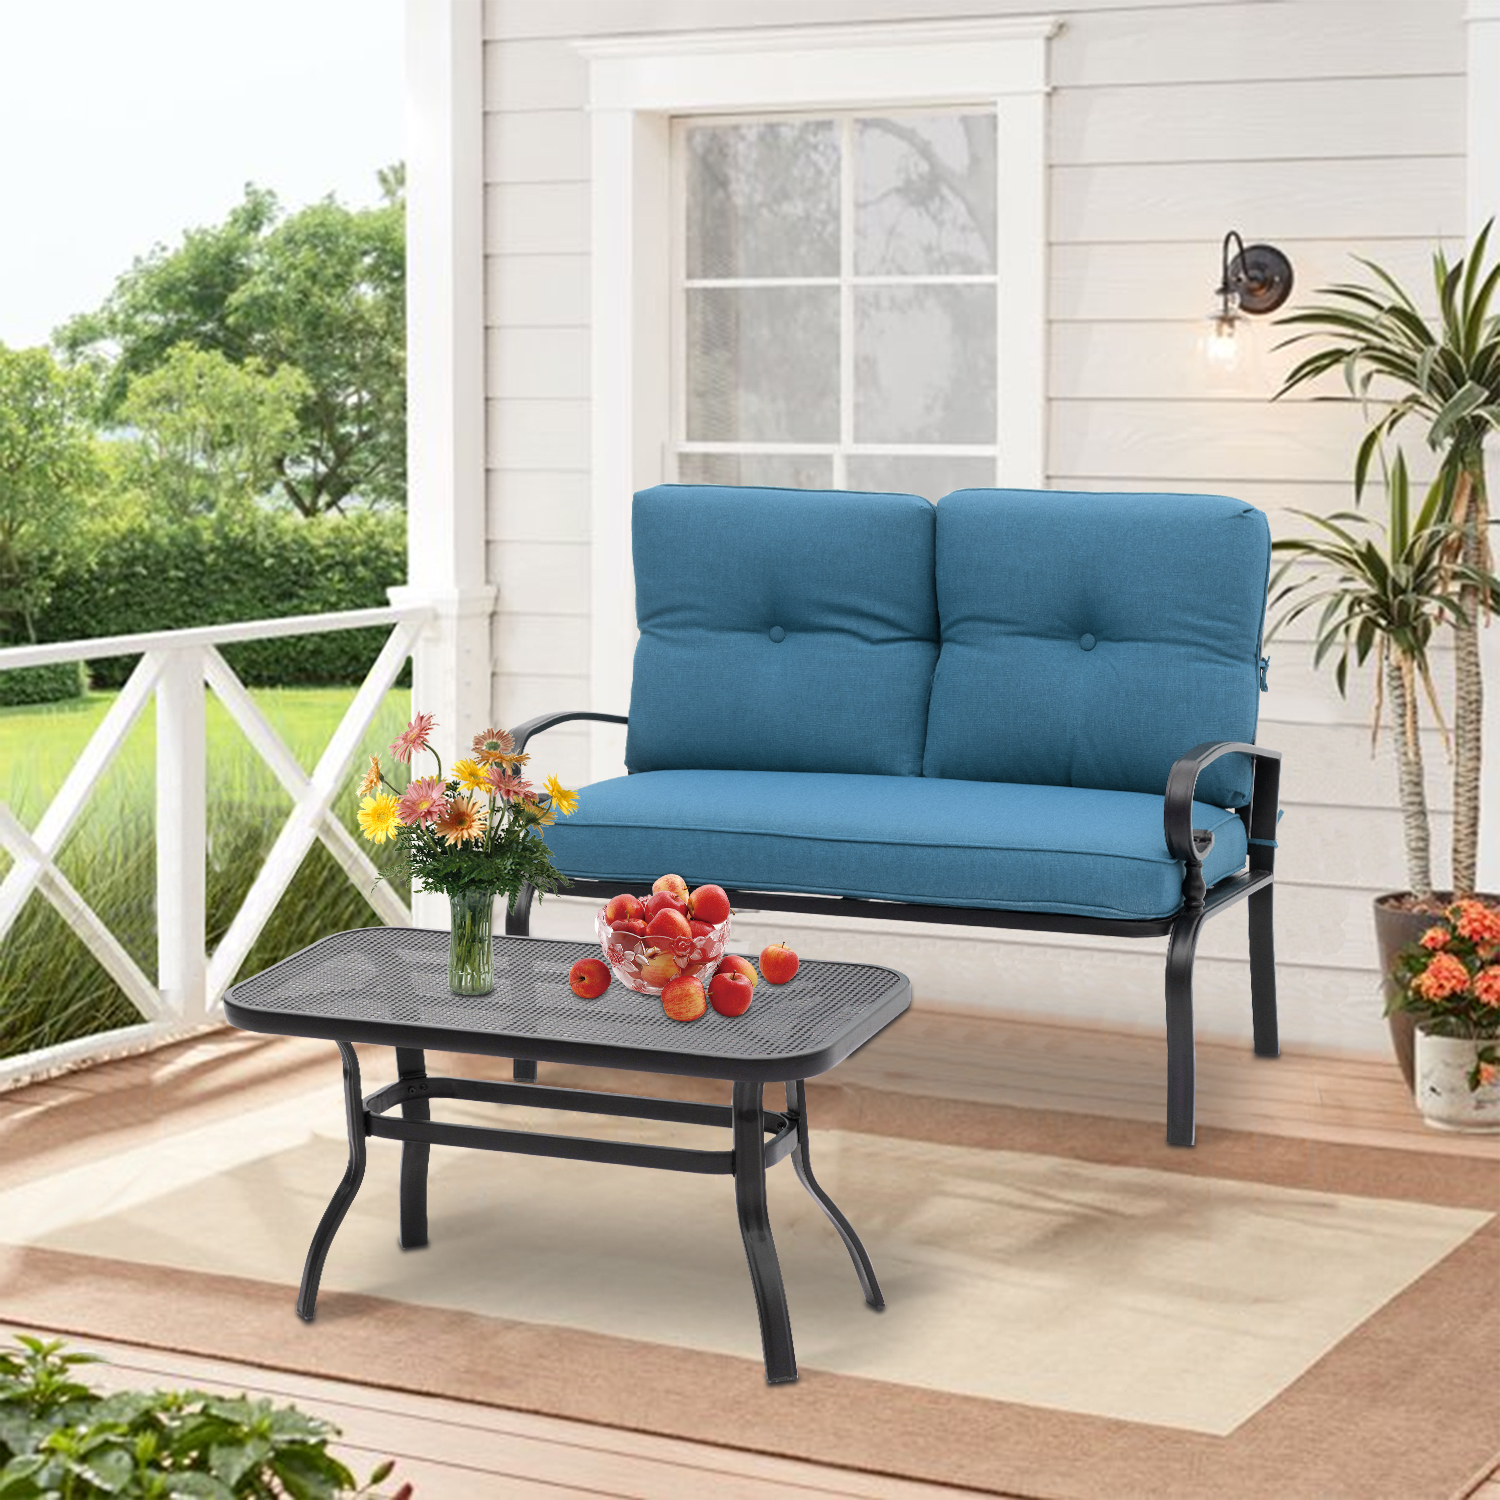 SUNCROWN 2-Piece Patio Furniture Outdoor Loveseat Set Wrought Iron Frame Peacock Blue Cushions Bench Sofa with Coffee Table - image 1 of 7